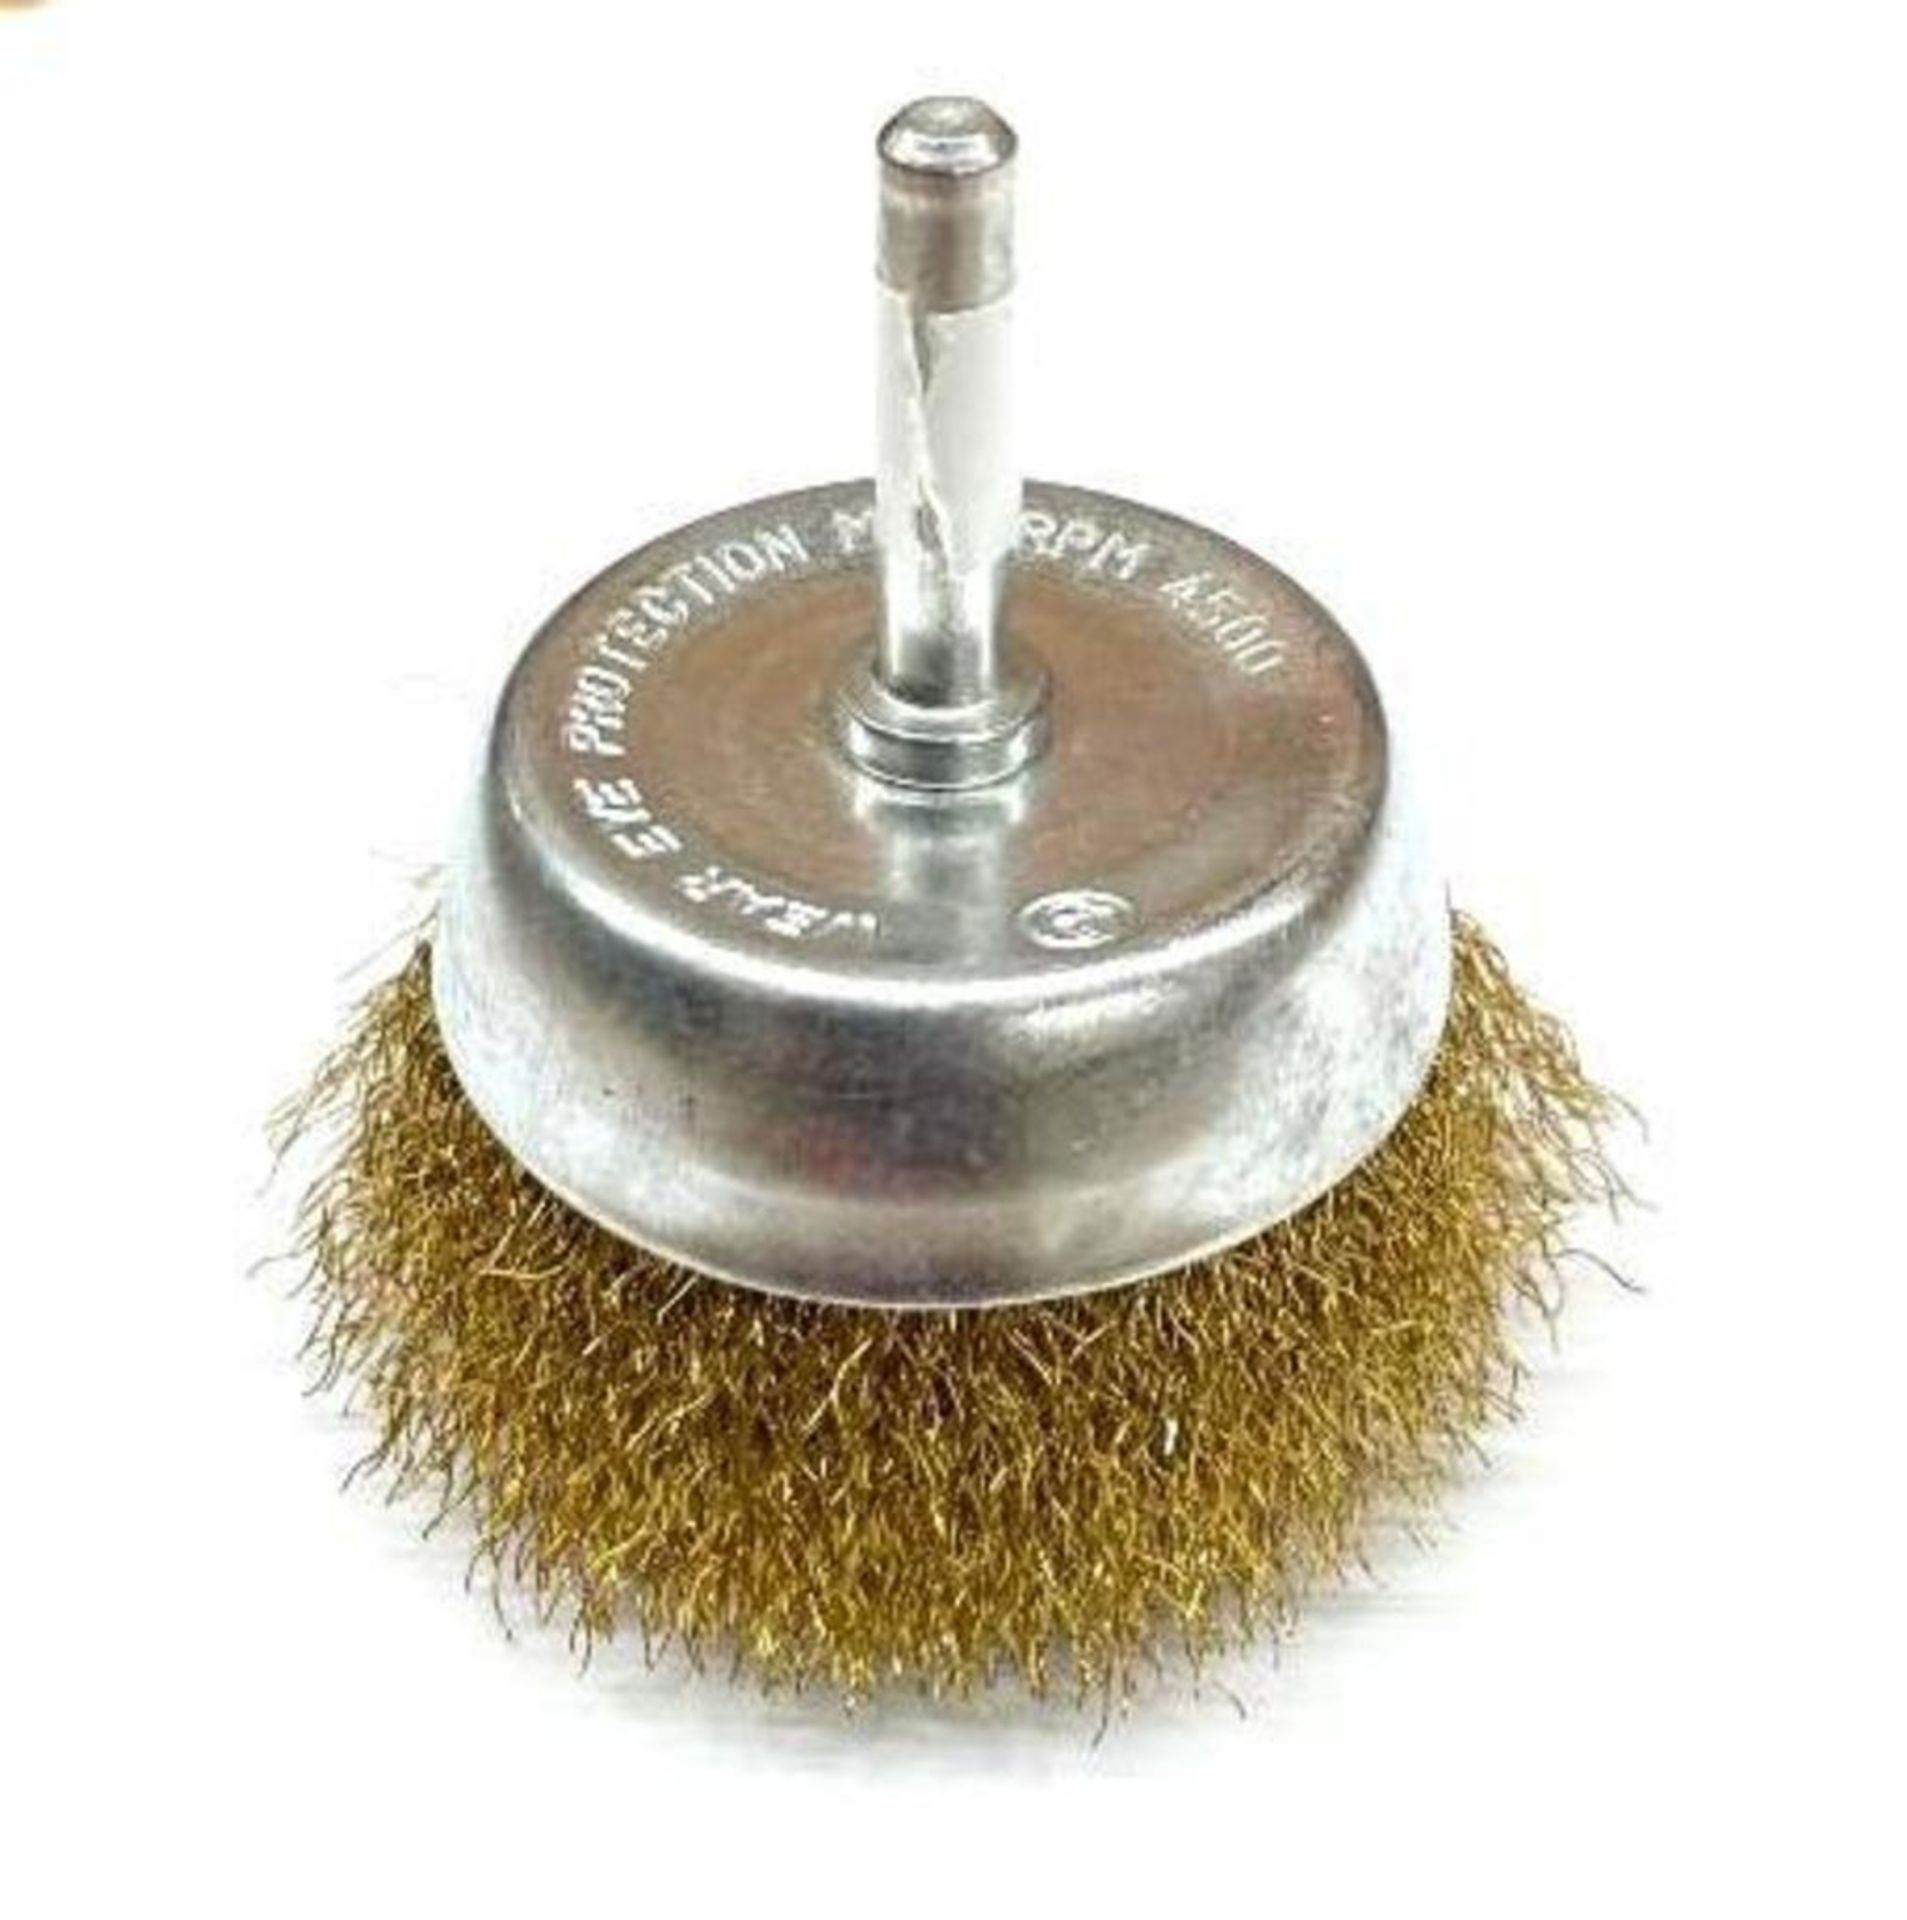 DESCRIPTION: (4) CASES OF 2 1/2" BRASS CUP BRUSH - FINE. 800 TOTAL BRAND / MODEL: EAZY POWER 87470 A